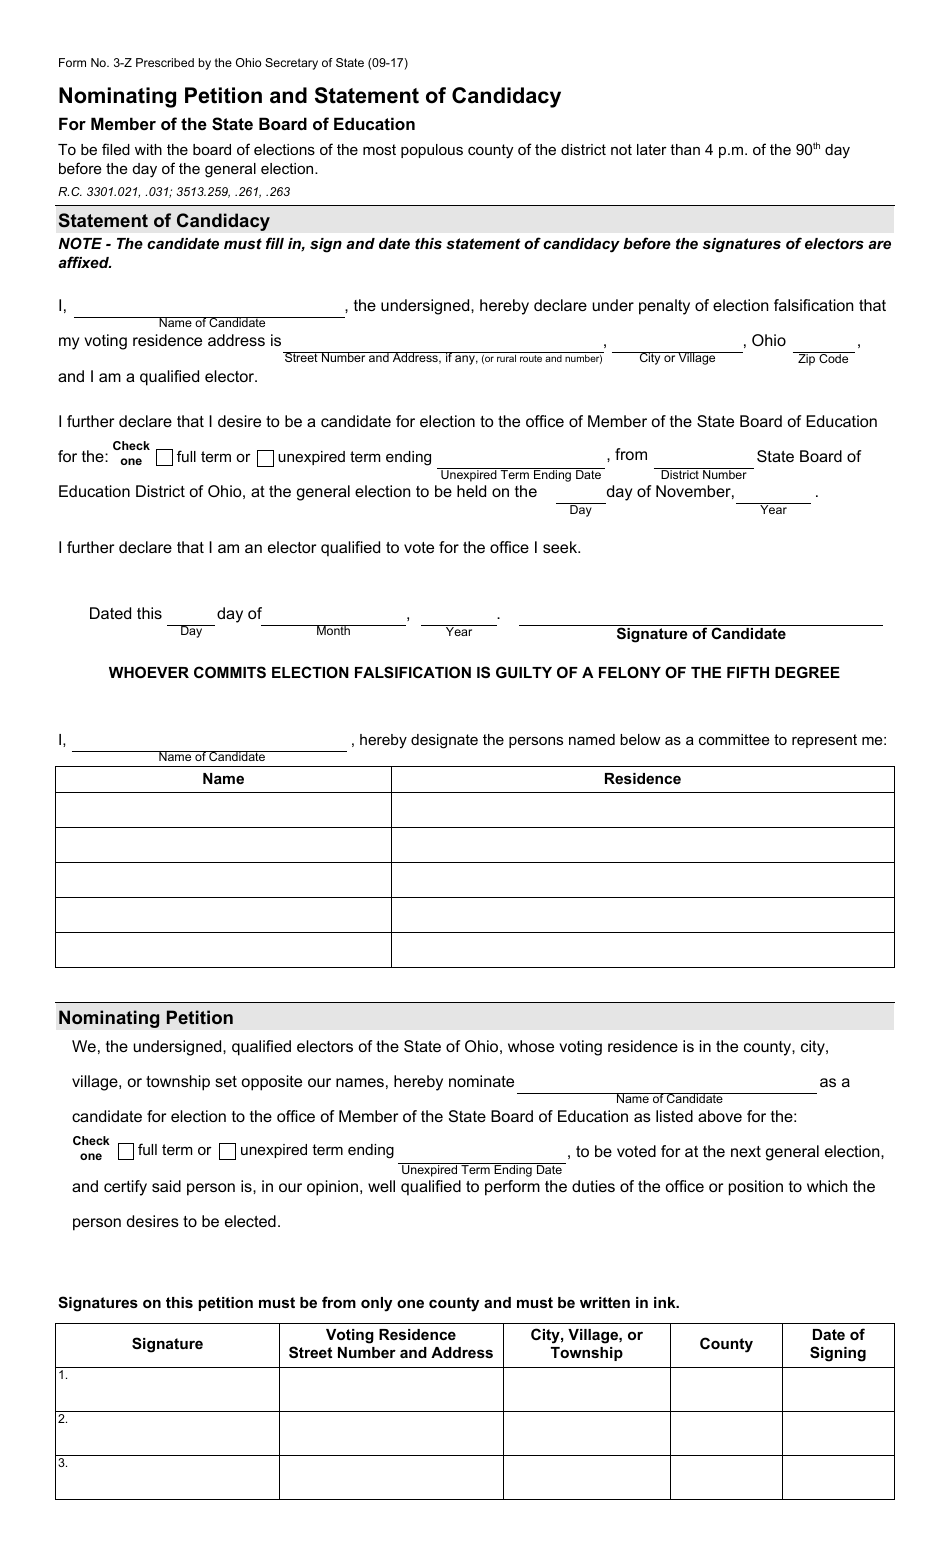 Form 3-Z Nominating Petition and Statement of Candidacy for Member of the State Board of Education - Ohio, Page 1